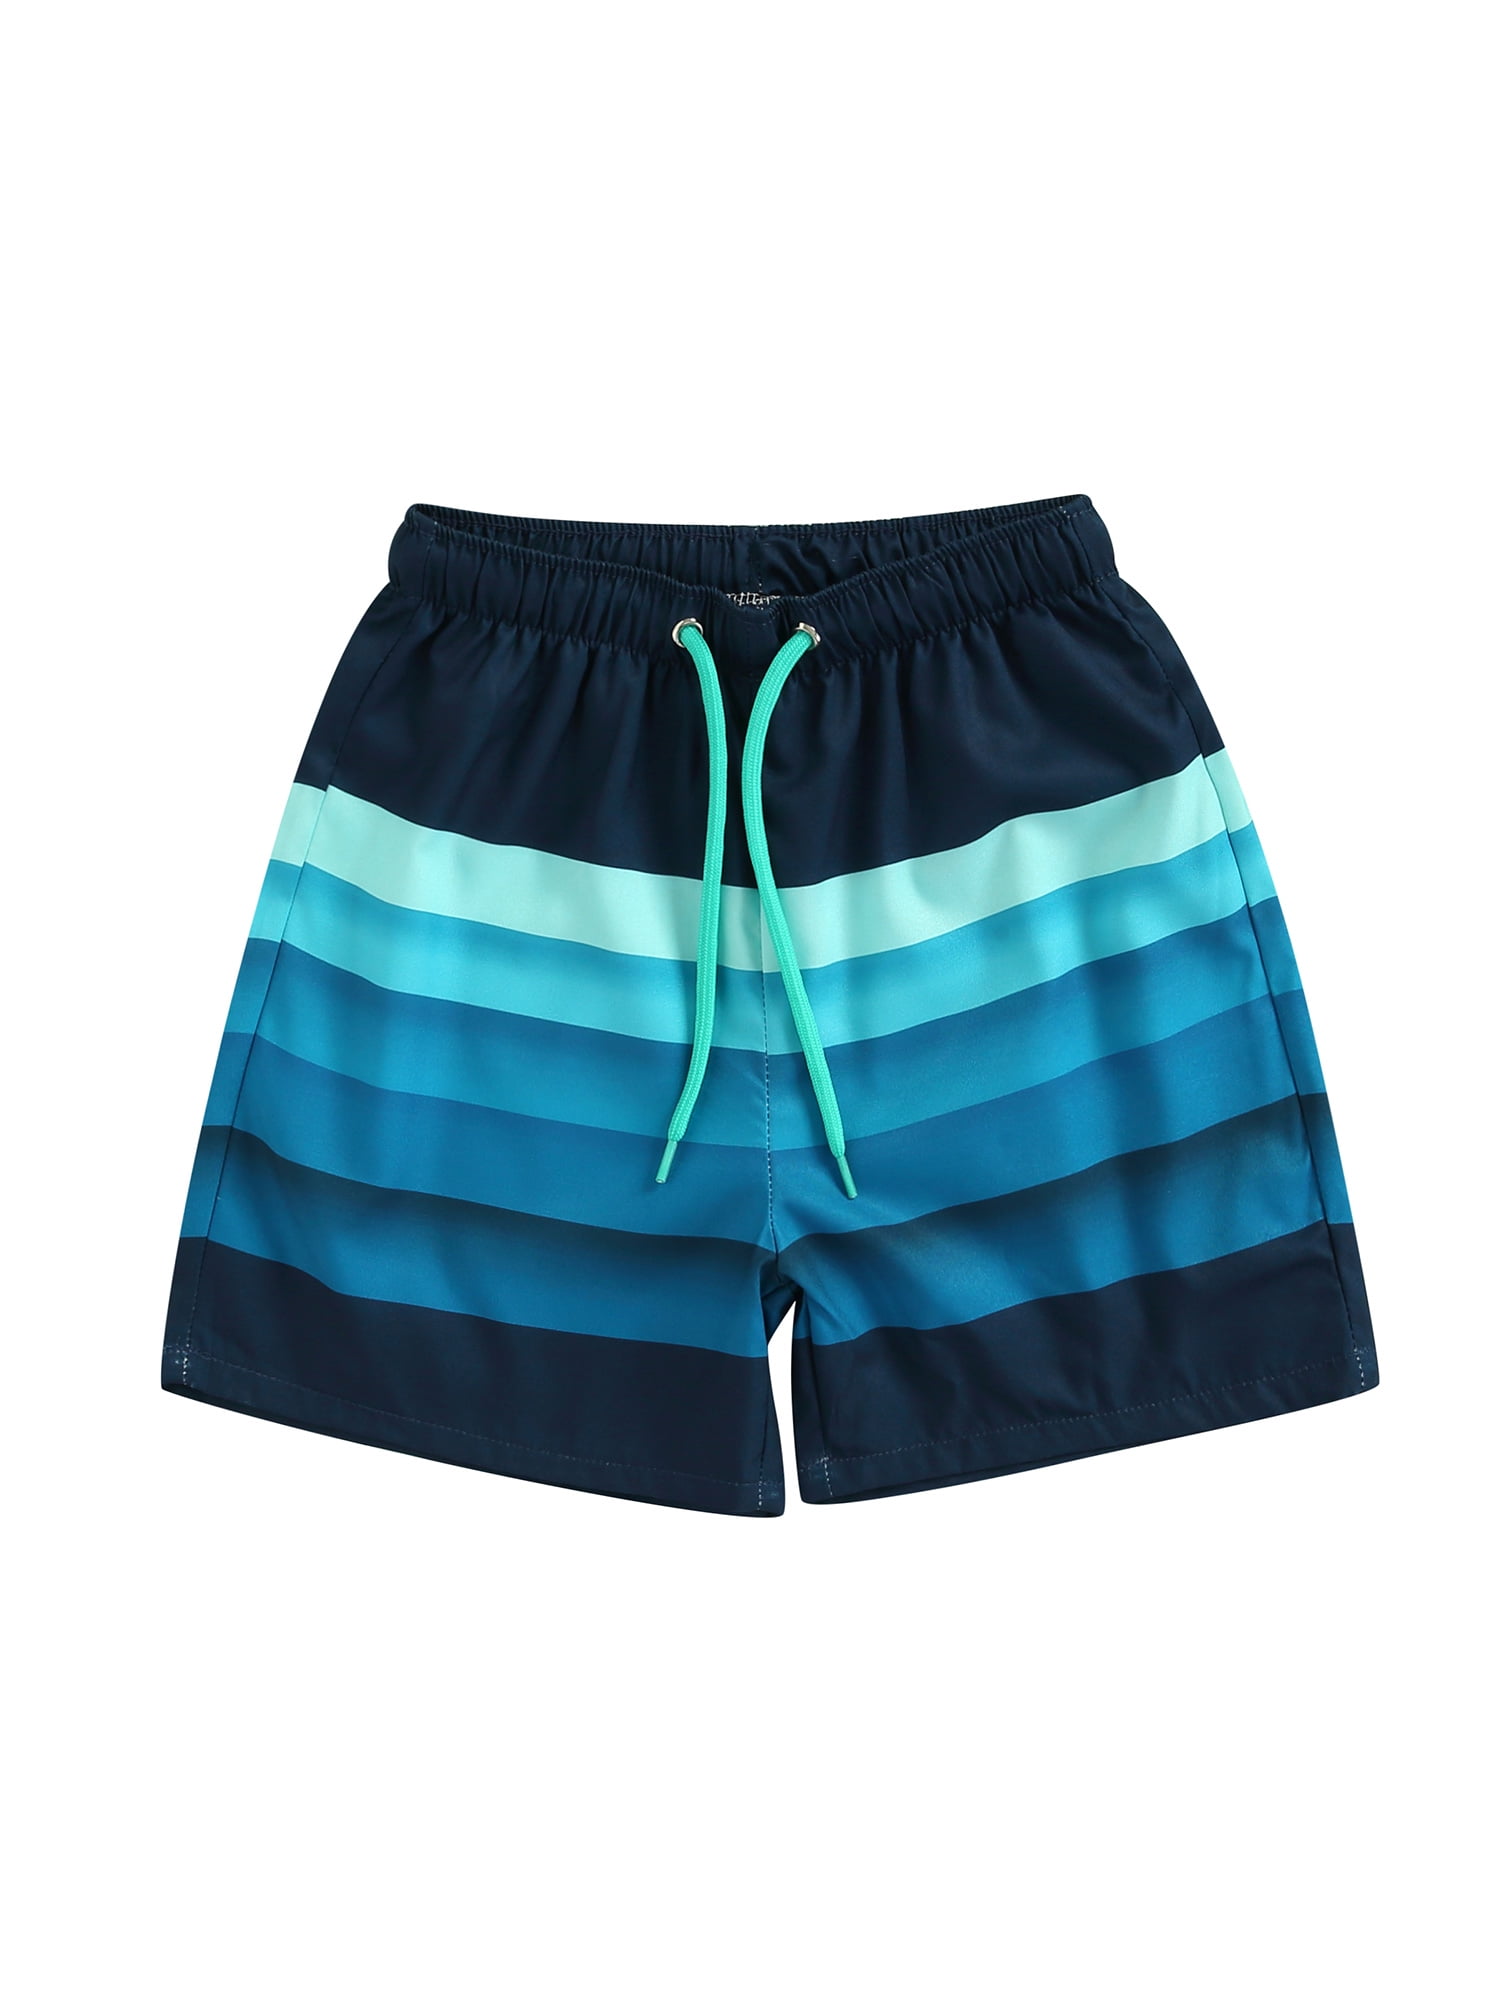 NEW Baby Boys Swim Trunks Bathing Suit Shorts 12 Months Lined Green Blue Summer 